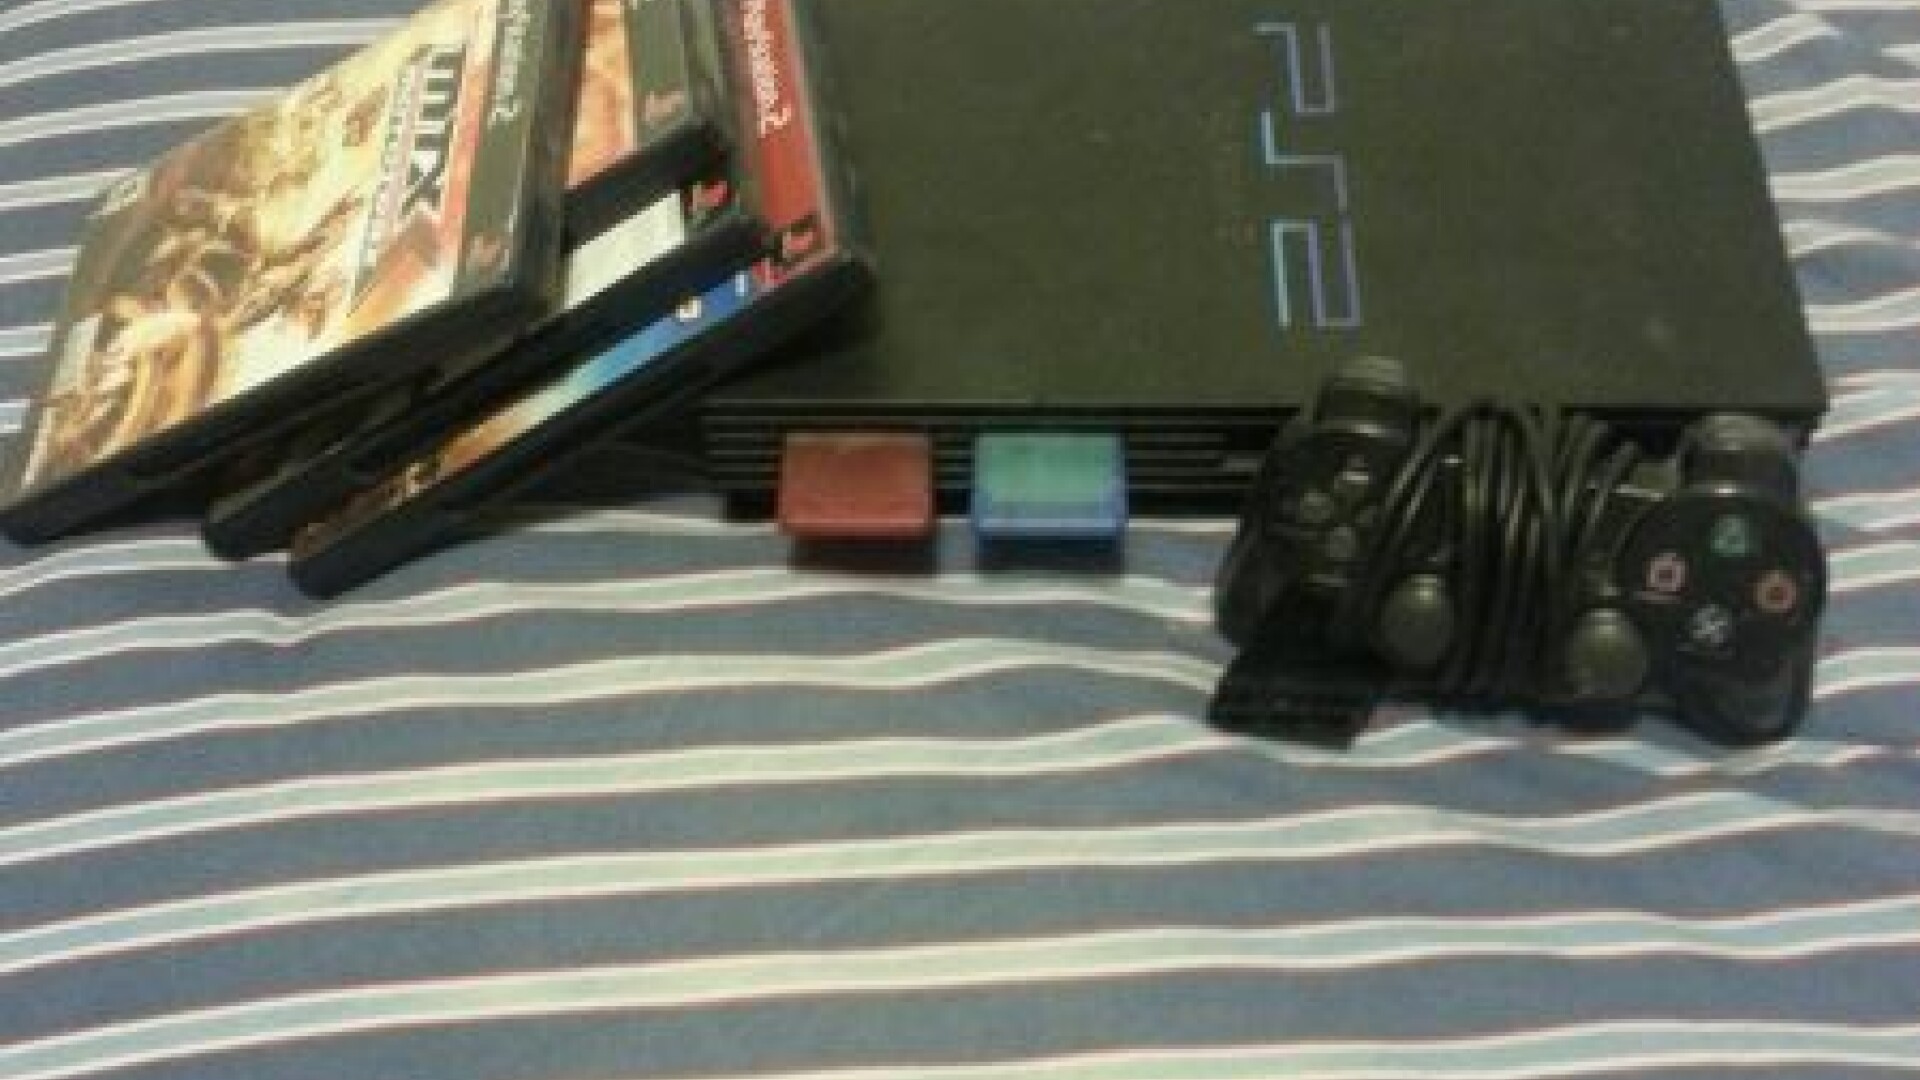 Play Station